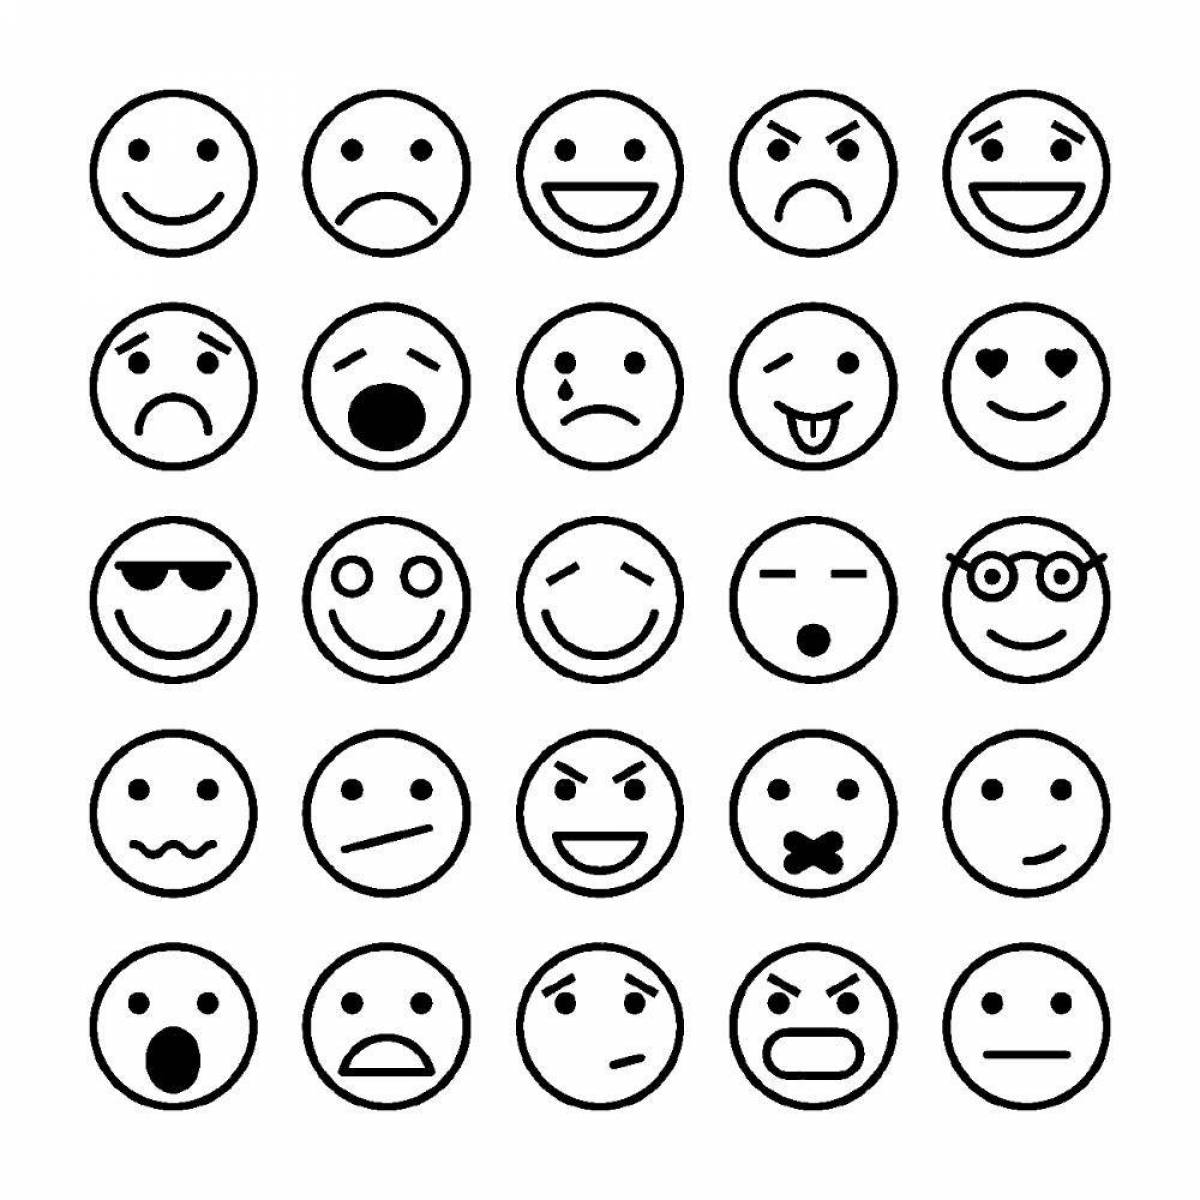 Fun coloring pages with smileys, small